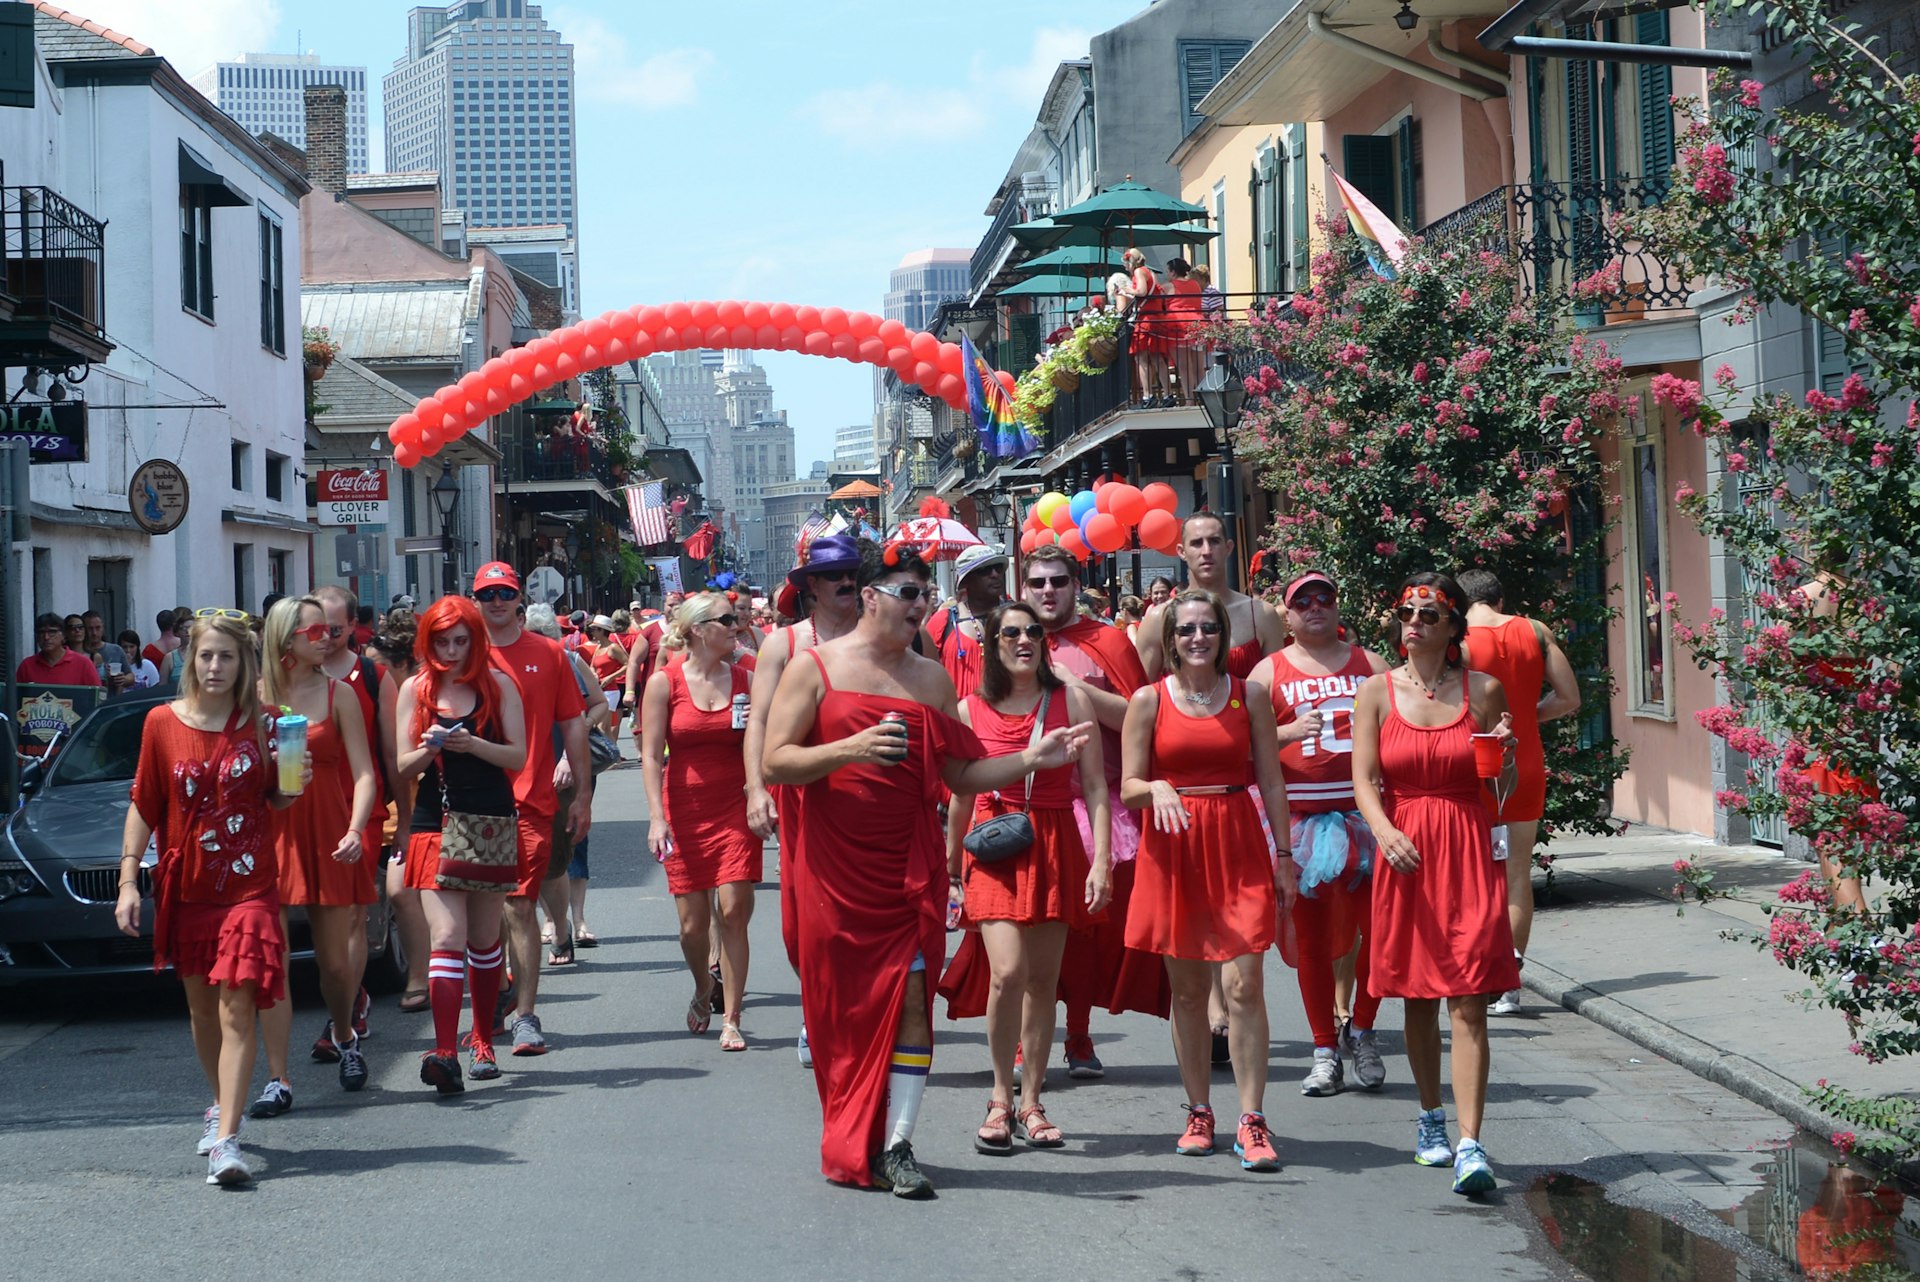 A group of men and women all wearing red dresses walk down the streets of New Orleans.  